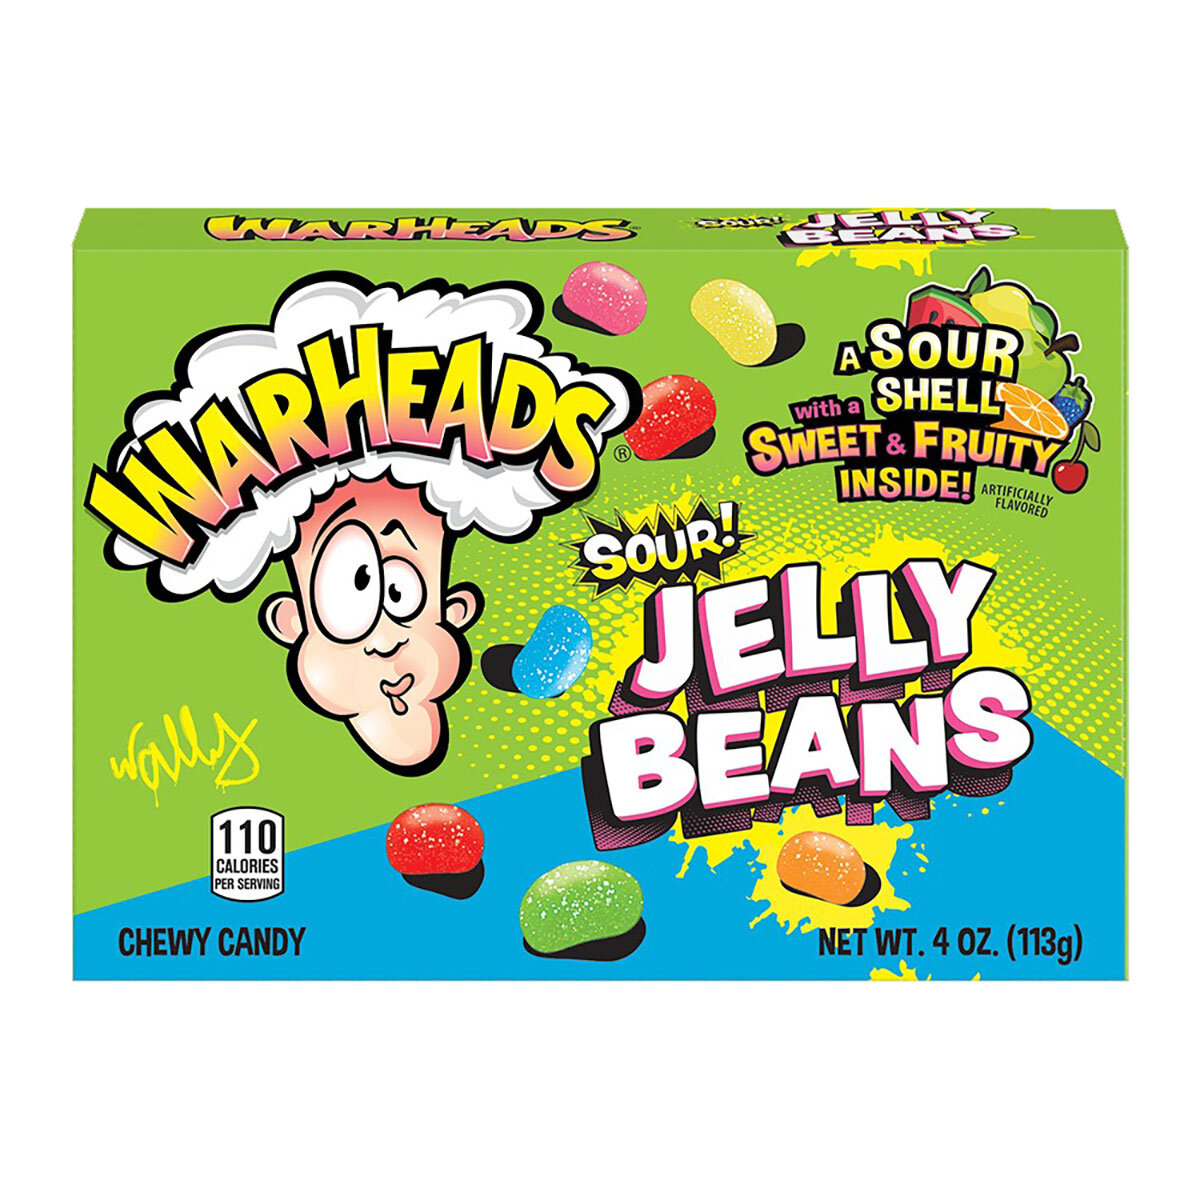 World of Sweets Warheads Jelly Beans, 113g